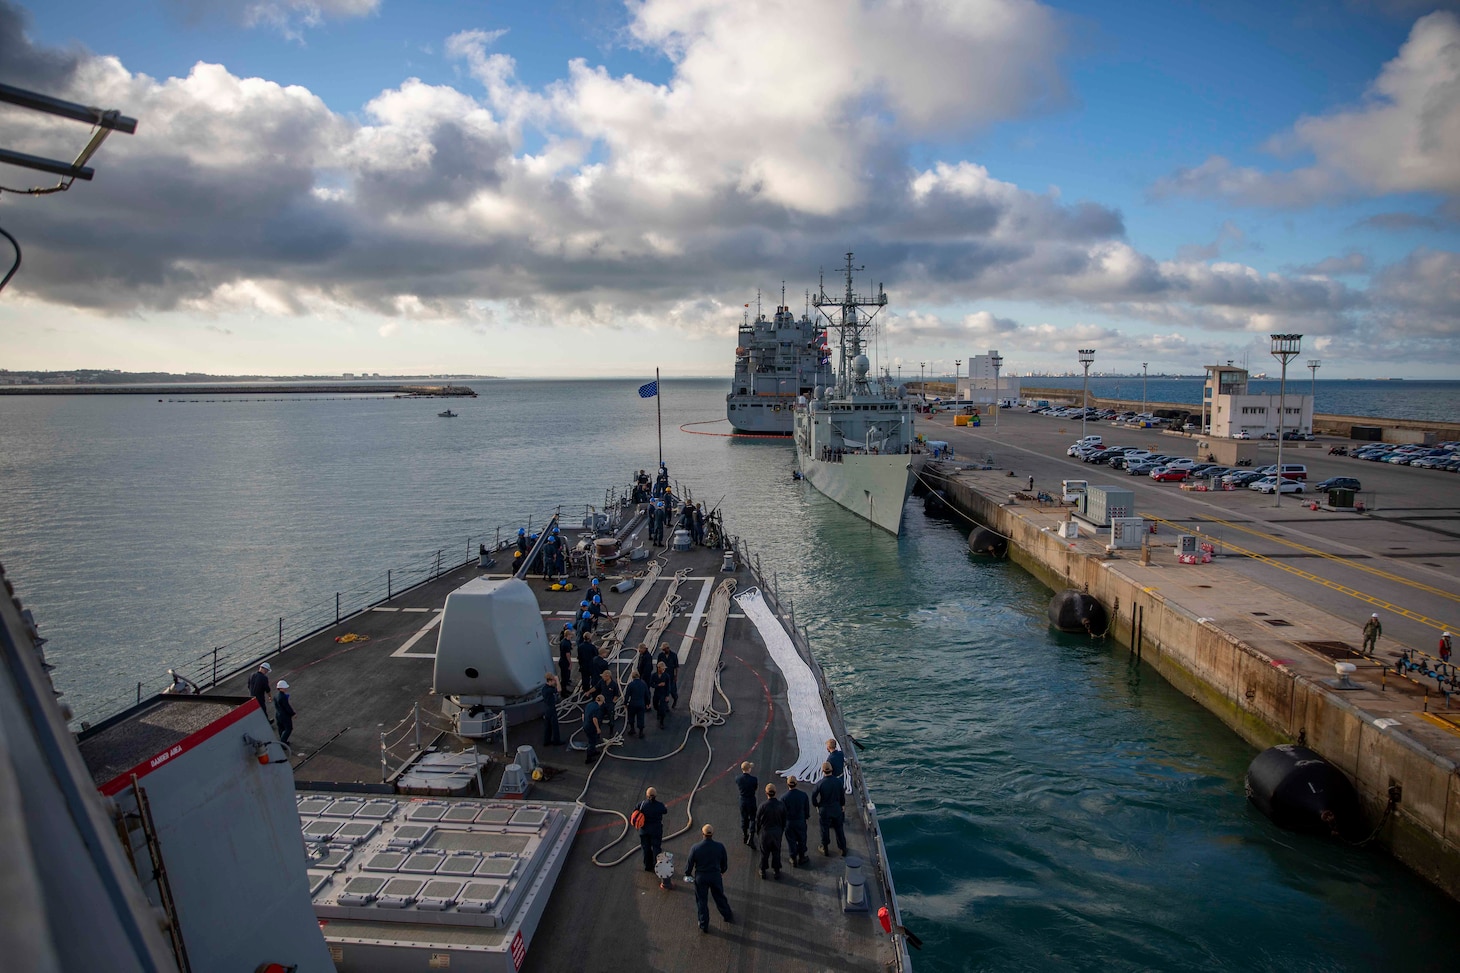 (June 1, 2022) The Arleigh Burke-class guided-missile destroyer USS Arleigh Burke (DDG 51) departs Naval Station Rota, Spain, June 1, 2021. Arleigh Burke, forward-deployed to Rota, Spain, is on a scheduled deployment in the U.S. Naval Forces Europe area of operations, employed by U.S. Sixth Fleet, to defend U.S., allied and partner interests.